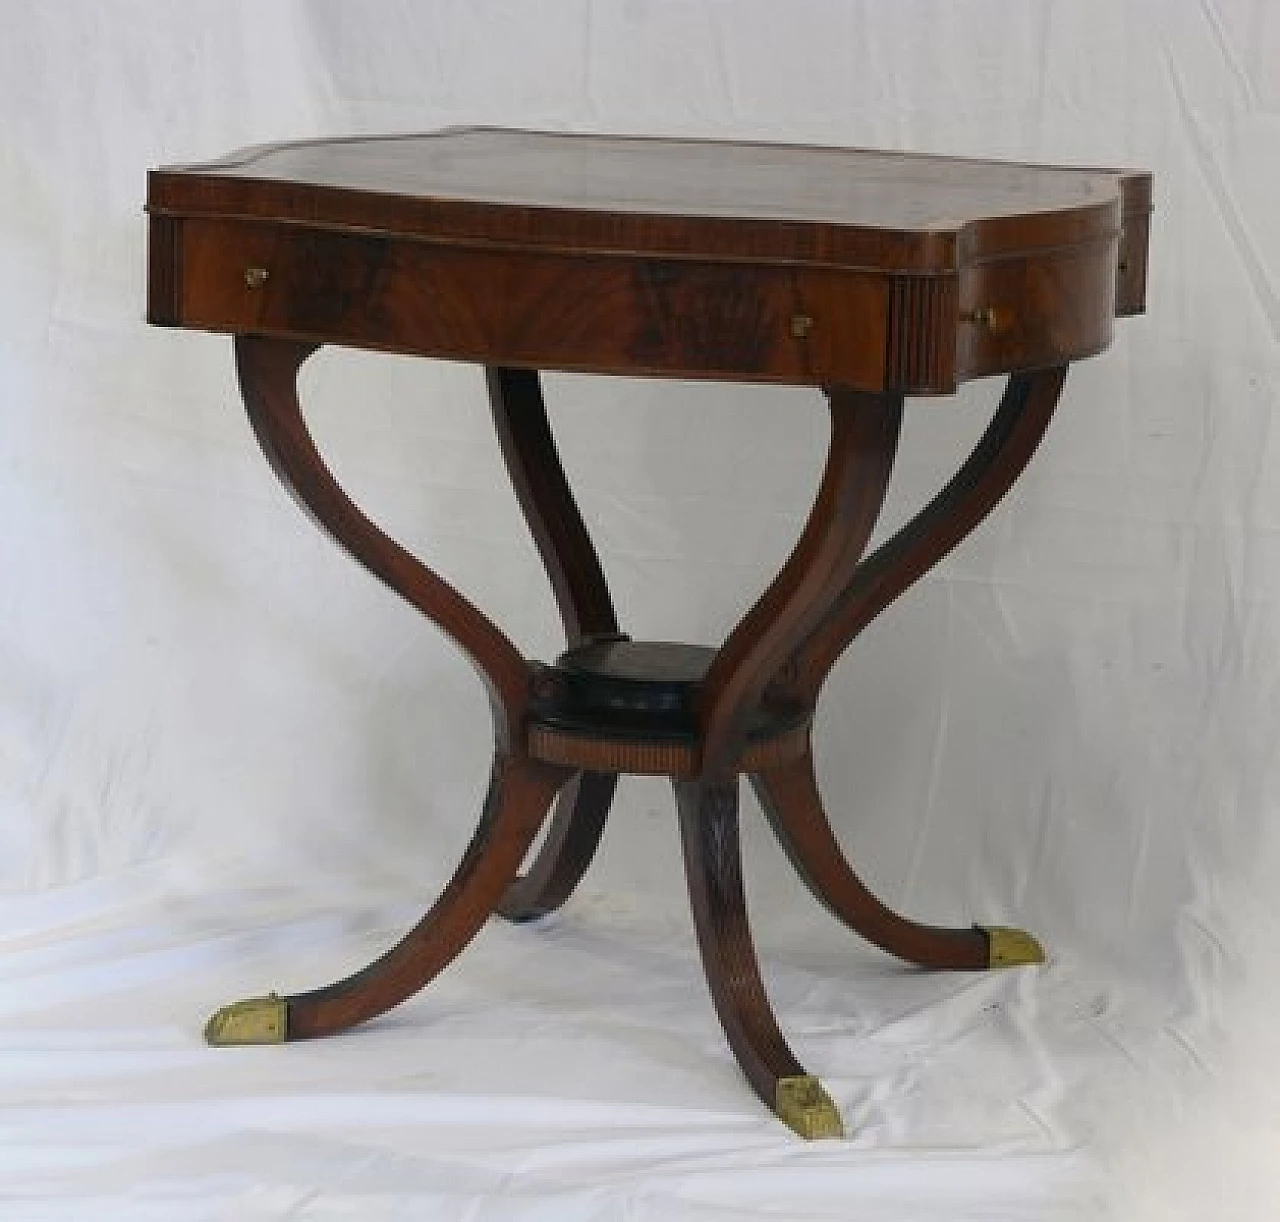 Mahogany feather game table with bronze feet and knobs, 1920s 1